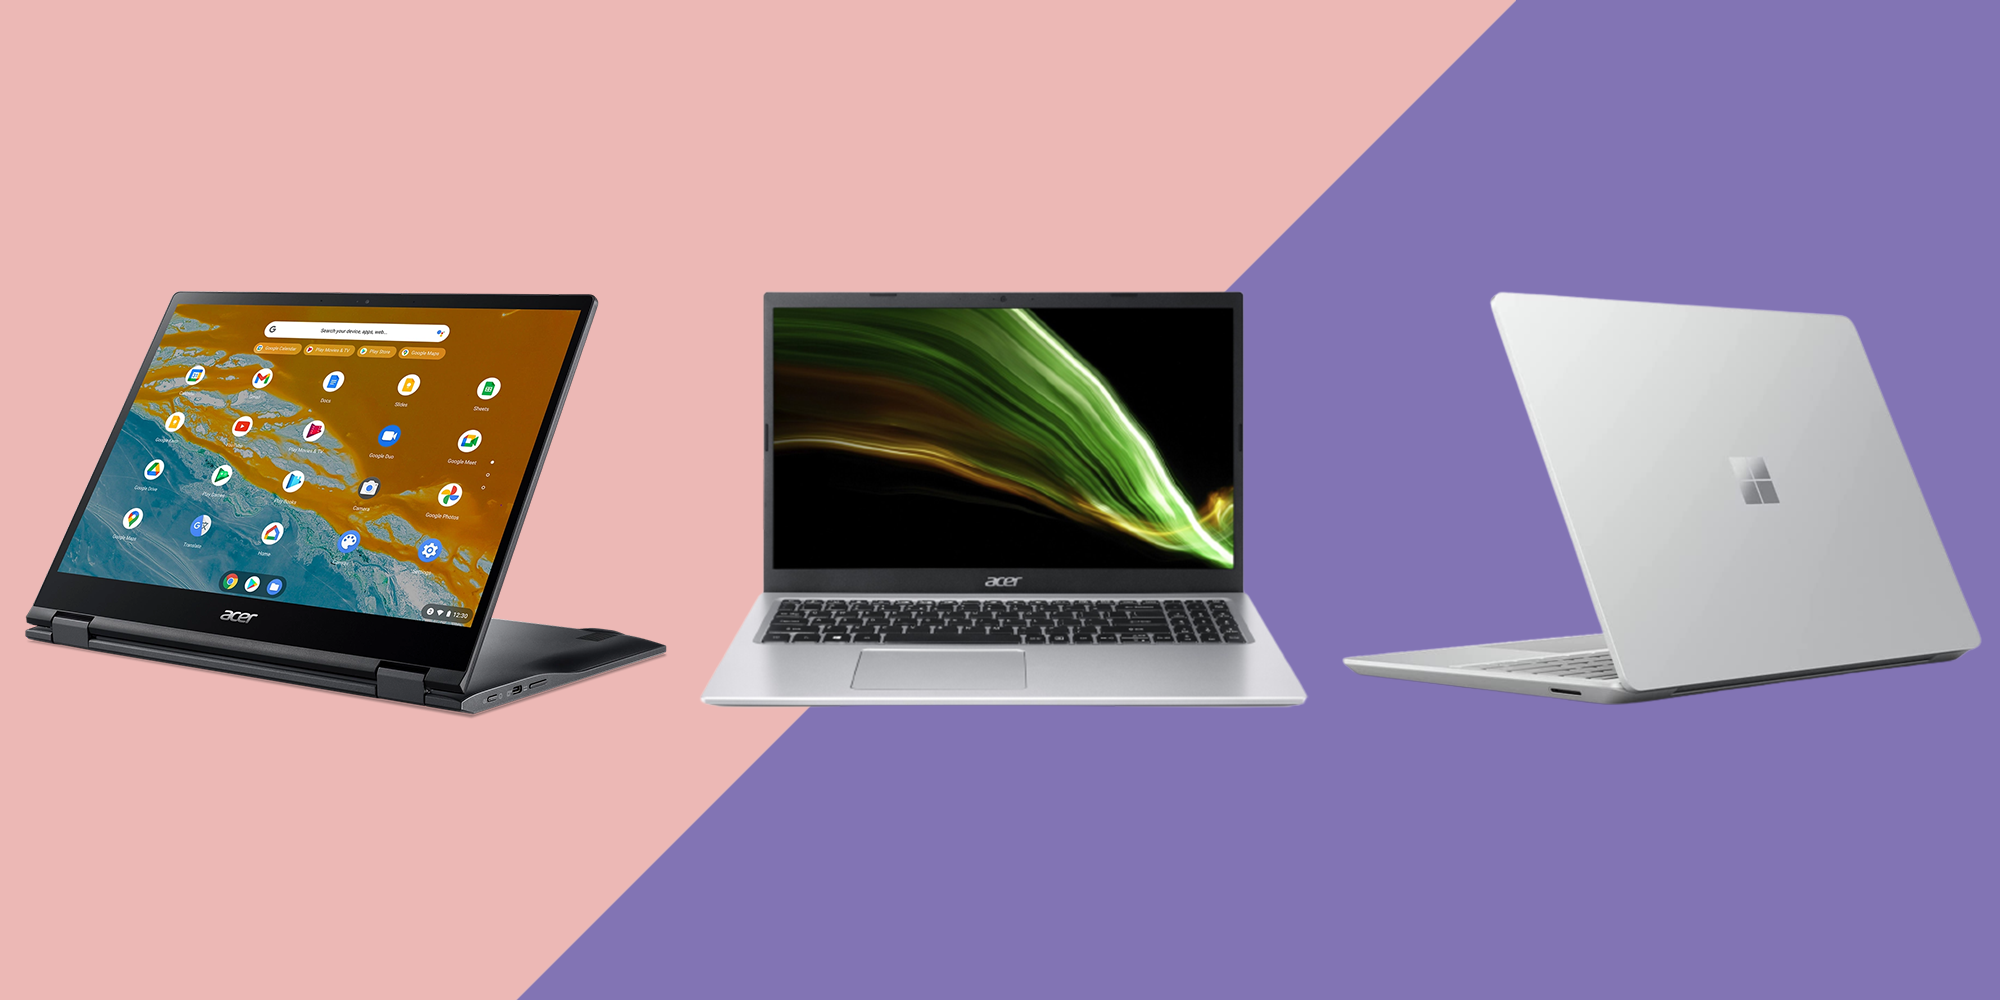 Best mini laptop for high portability: Buyer's guide to top 10 models